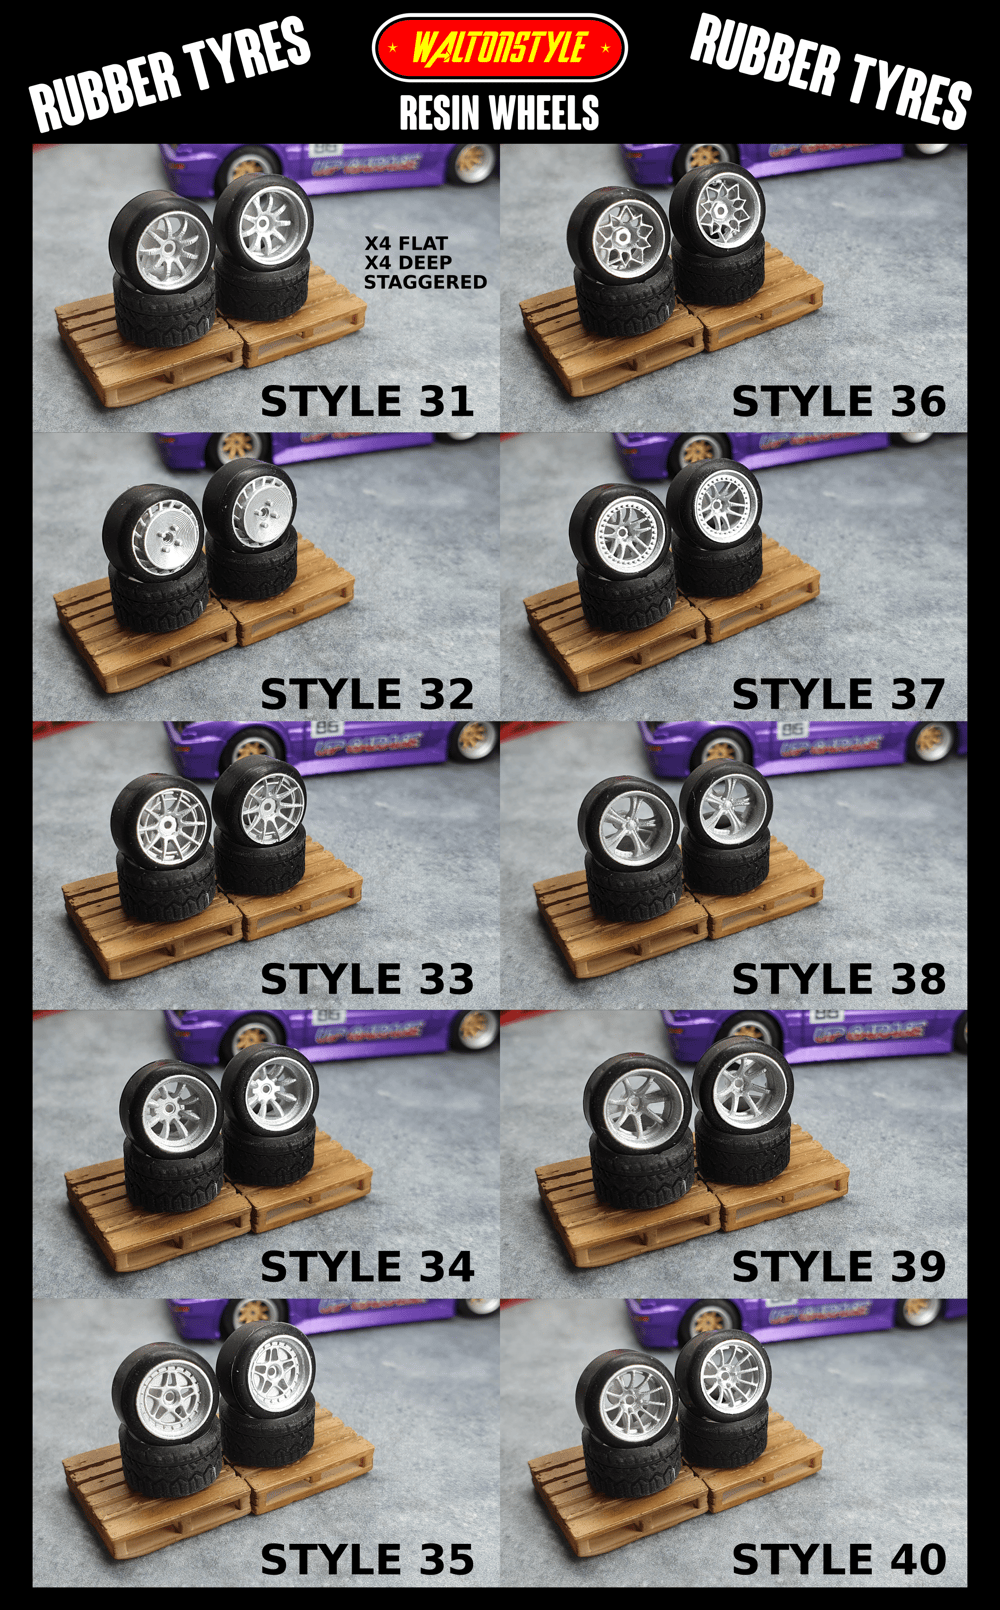  (GROUP 1) Rubber tyres with resin wheels  